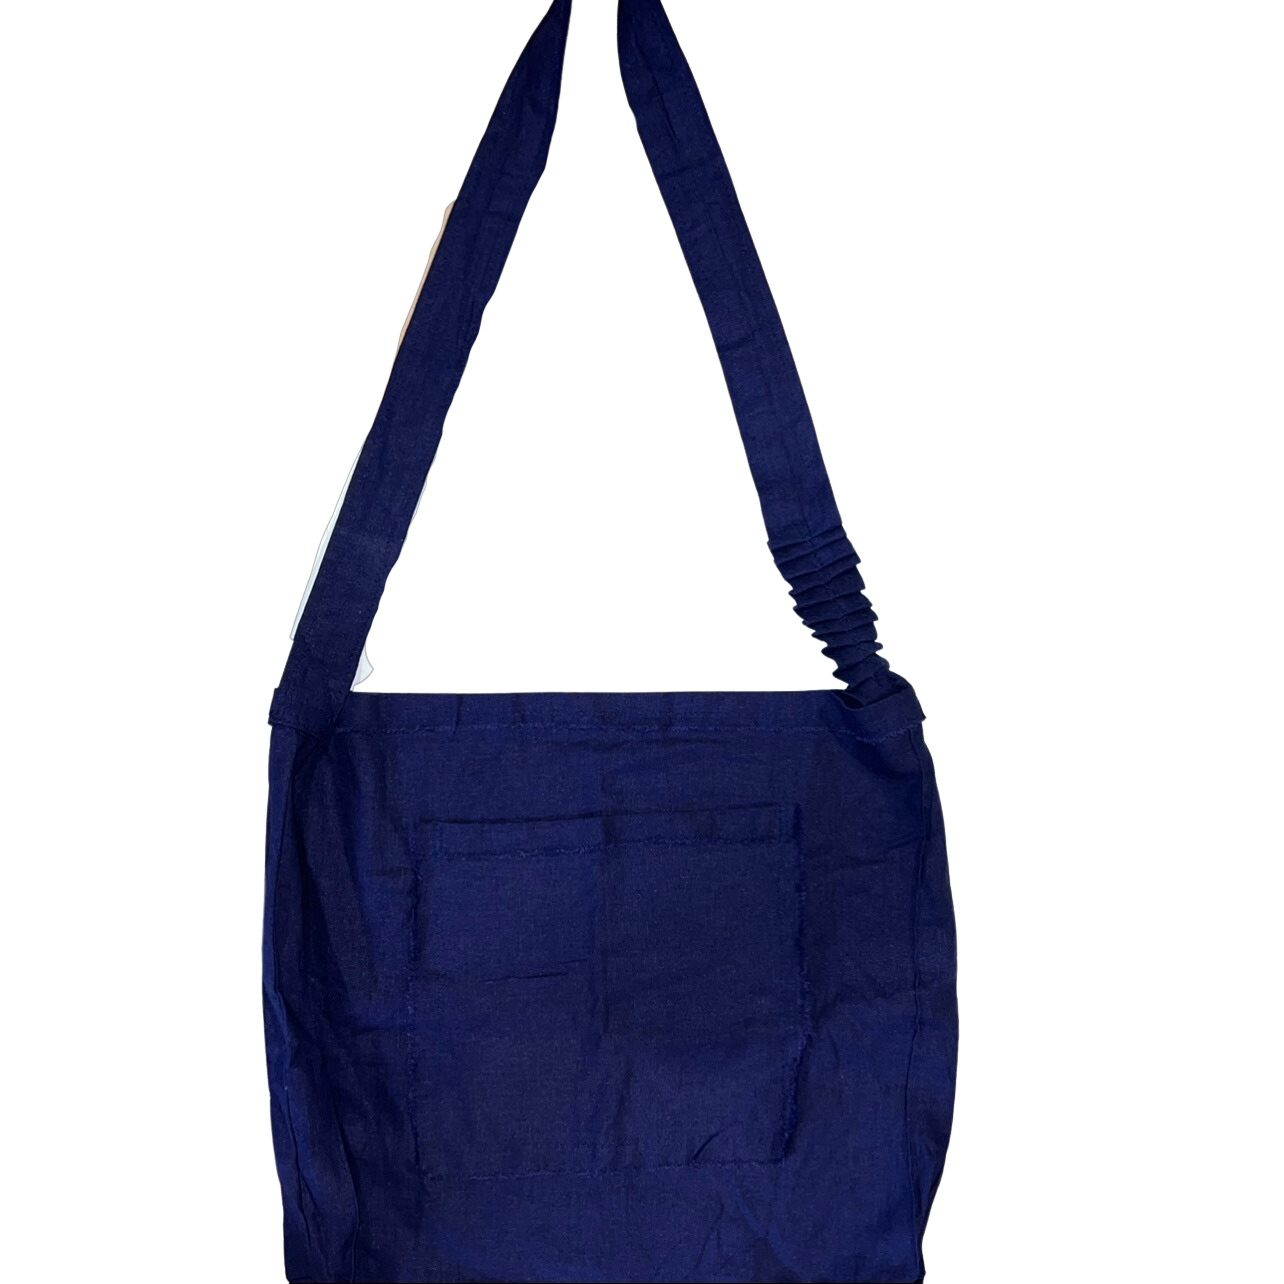 Cinched Strap Navy Blue Tote